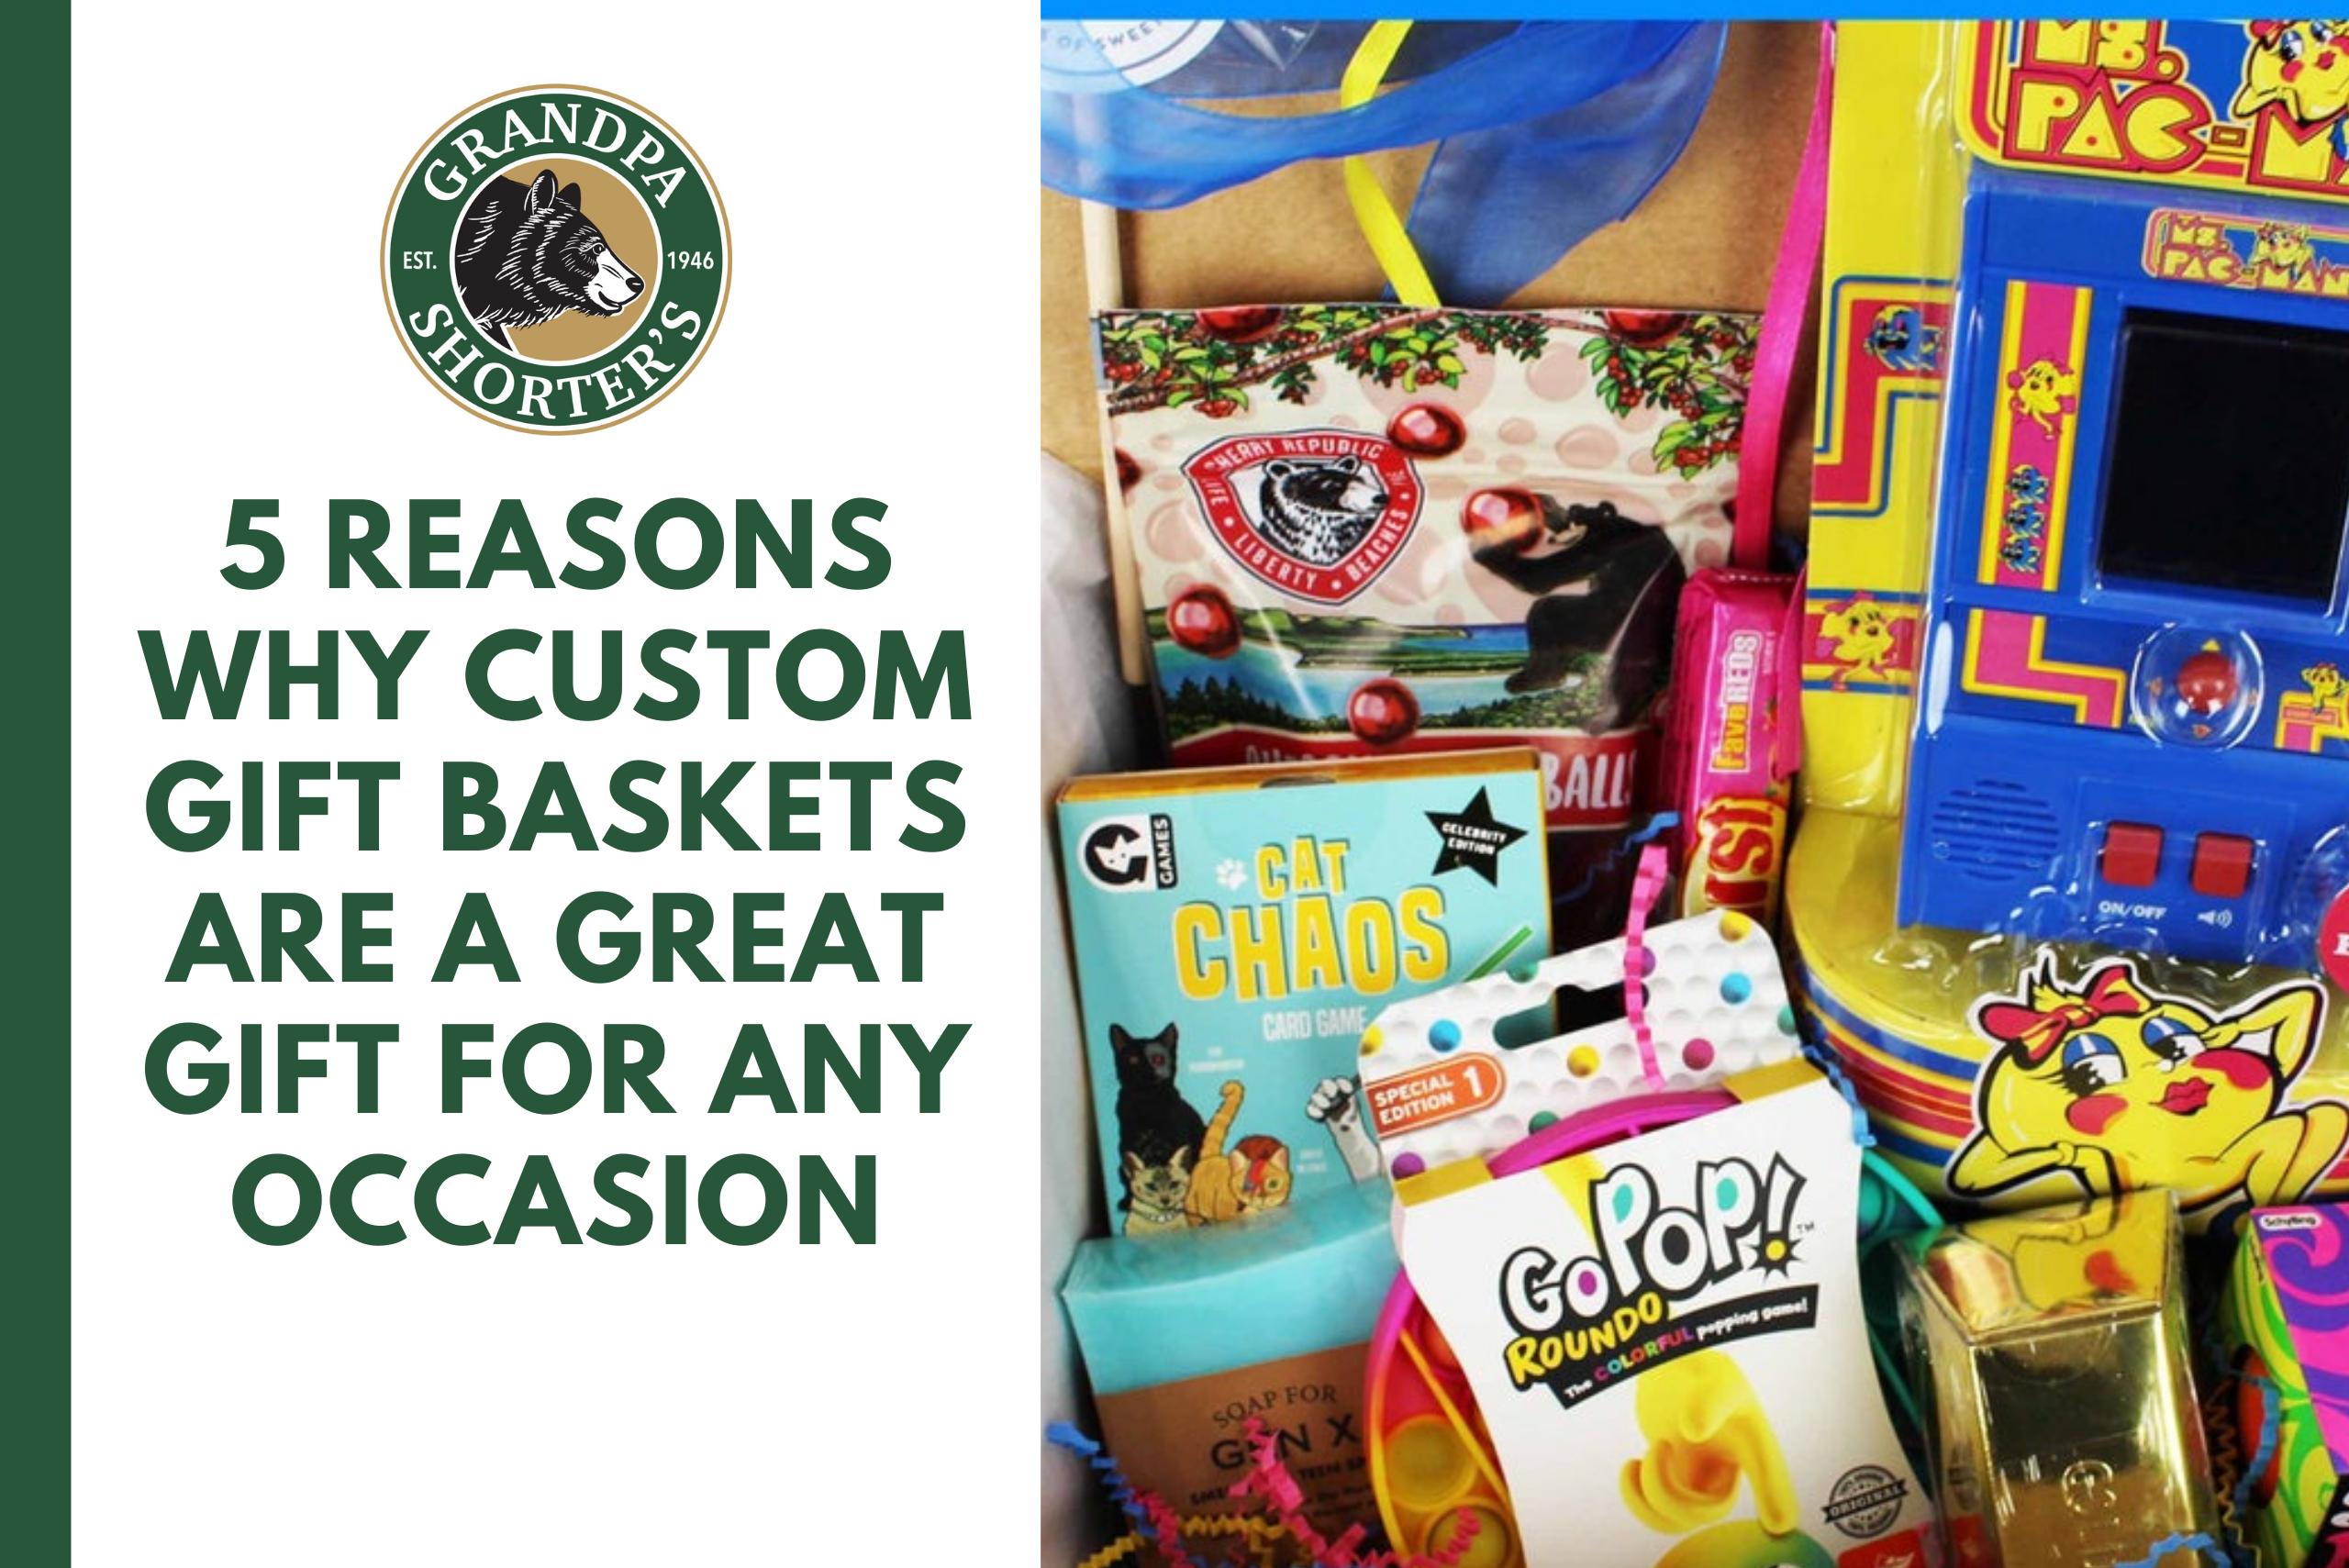 5 Reasons Why Custom Gift Baskets Are a Great Gift For Any Occasion